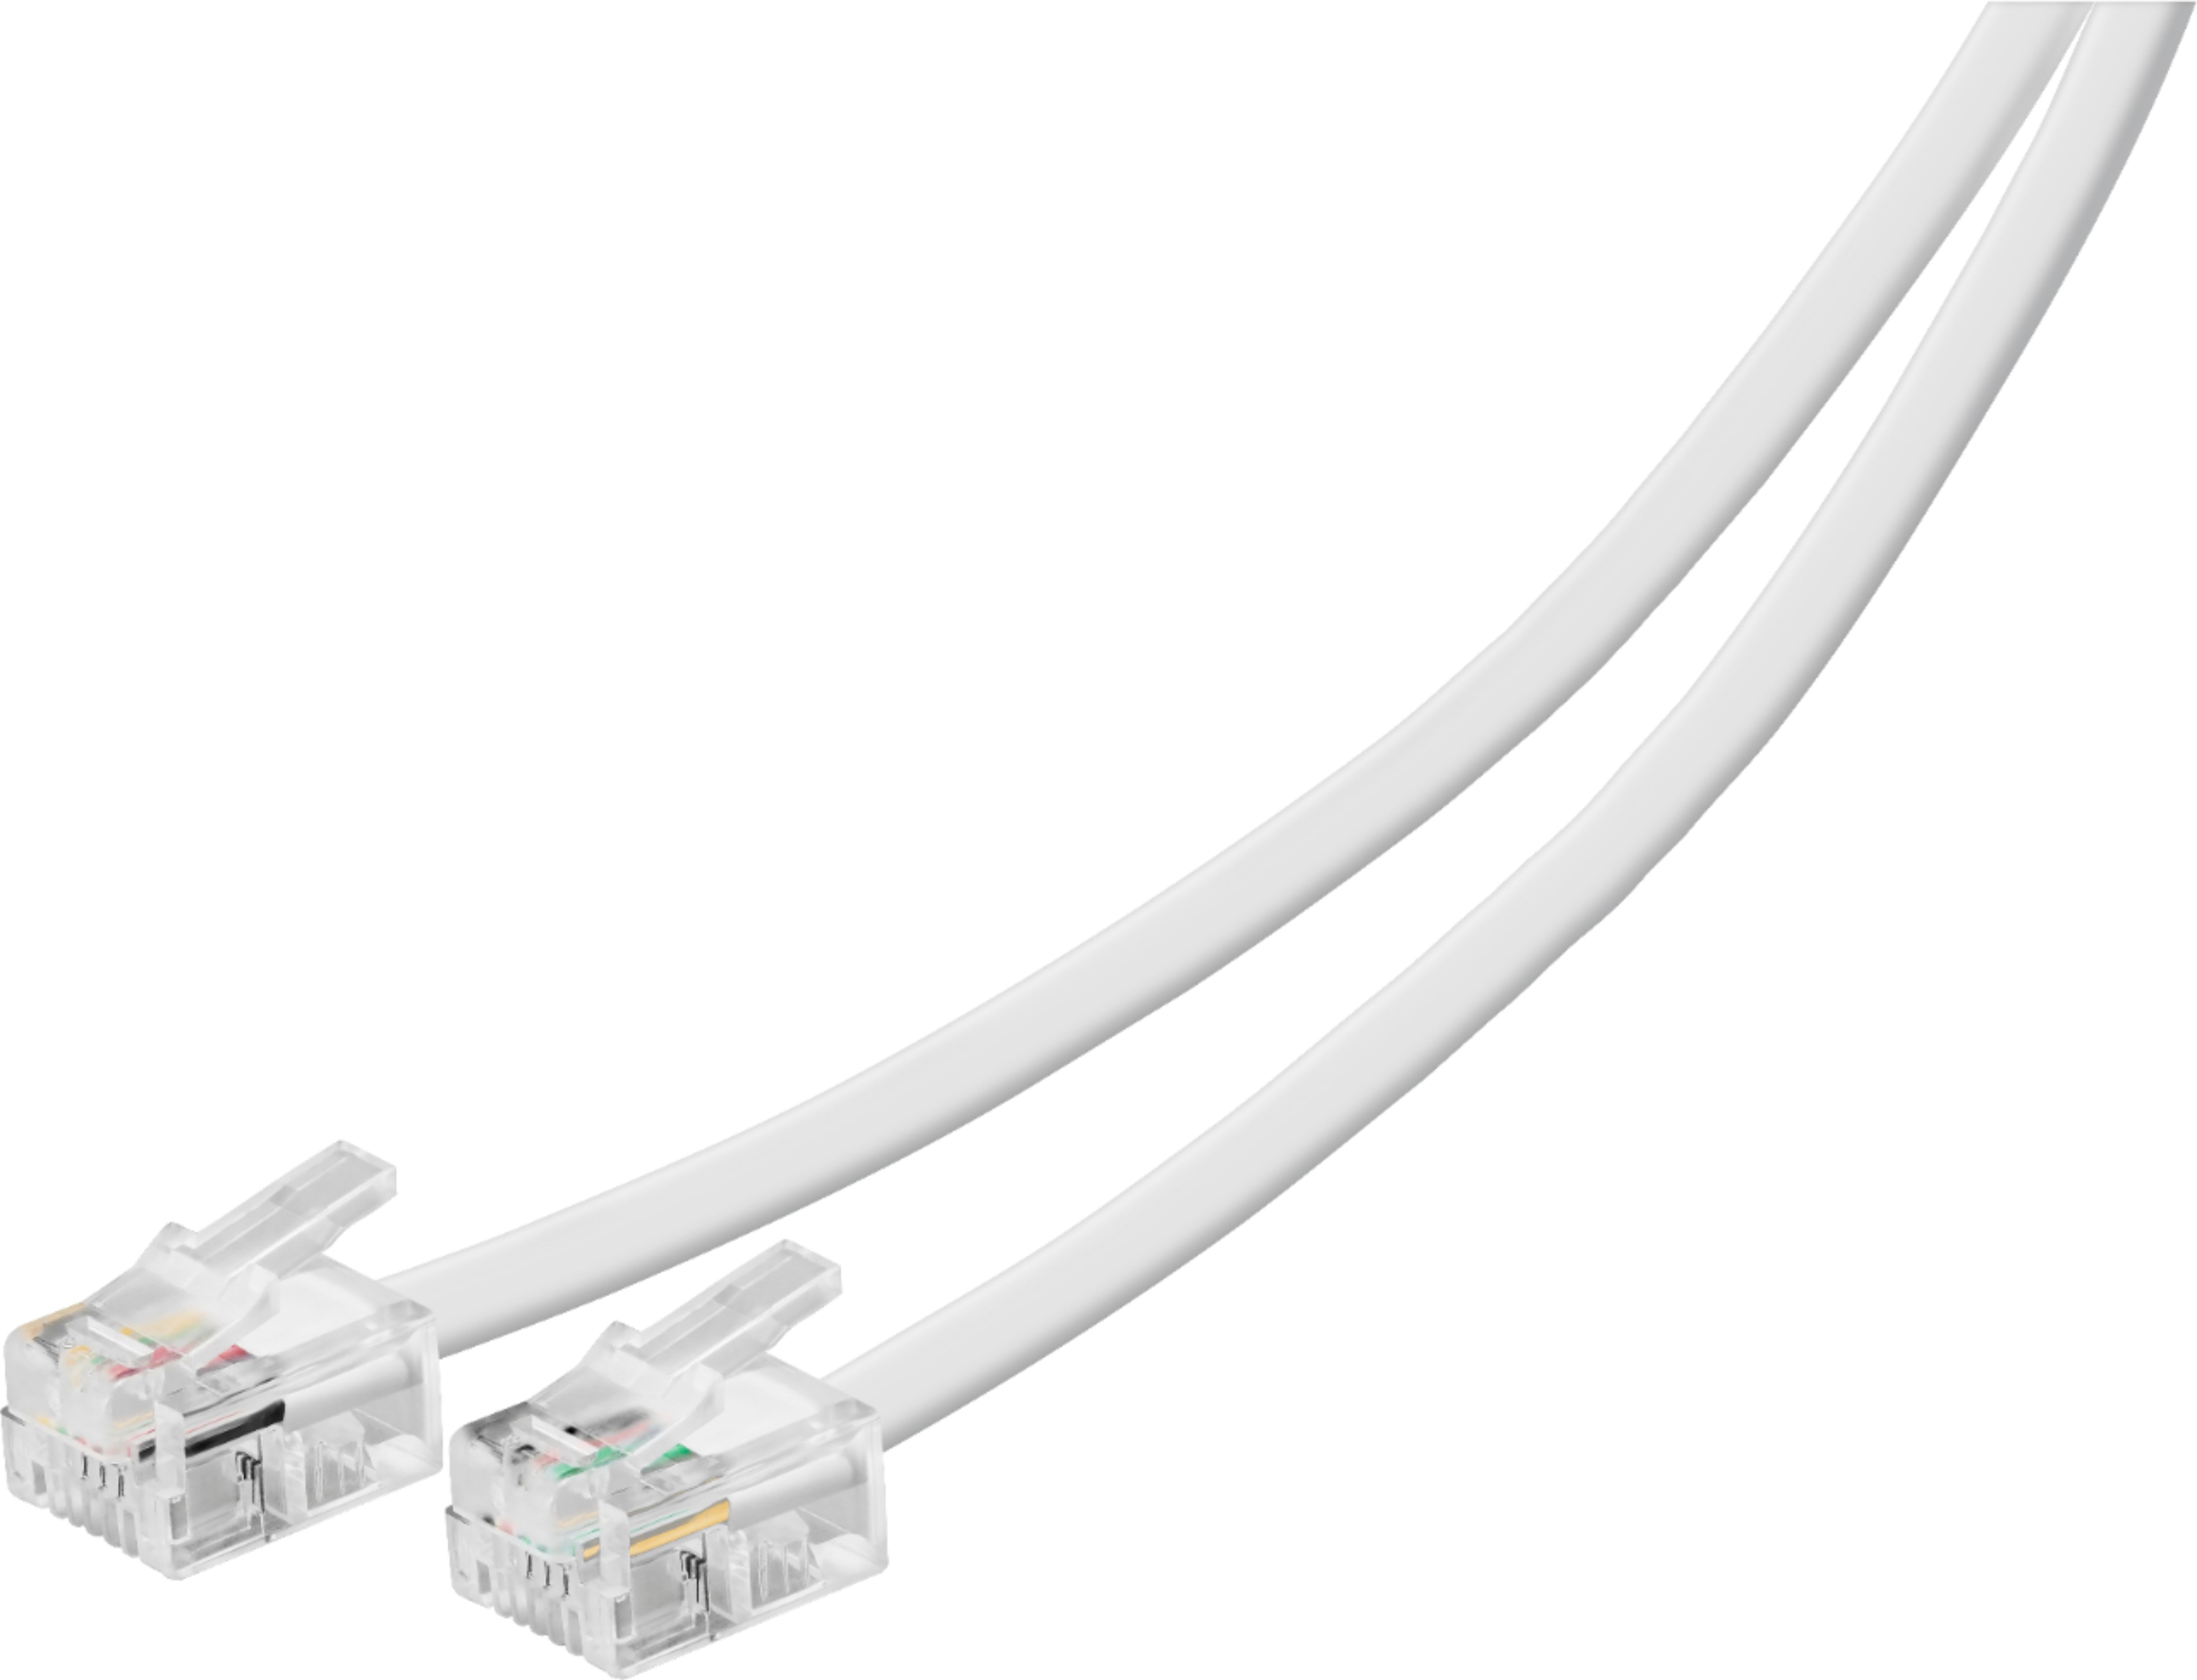 25' Ft White Telephone Extension Cord With Jacks Flat Wire 